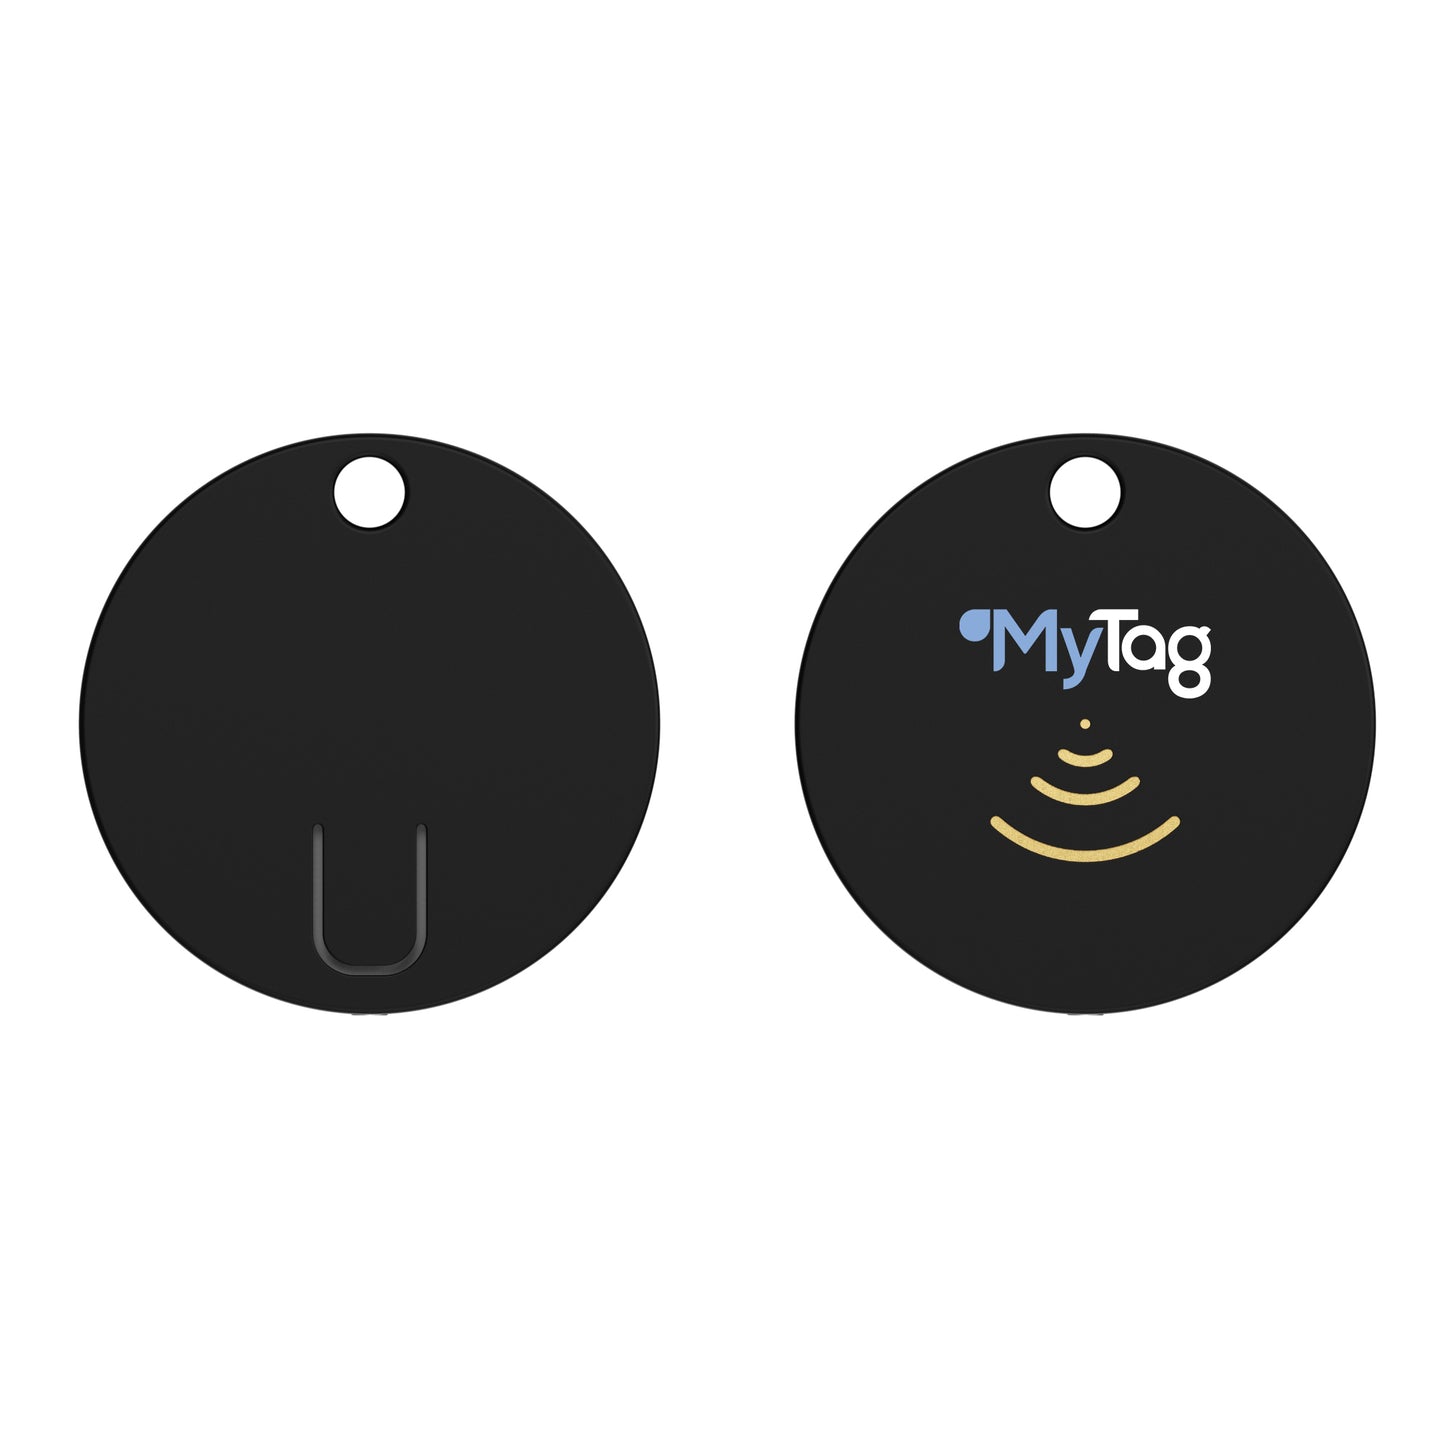 MyTag Classic - Buy 2 get 1 Free Offer (WHITE ONLY)